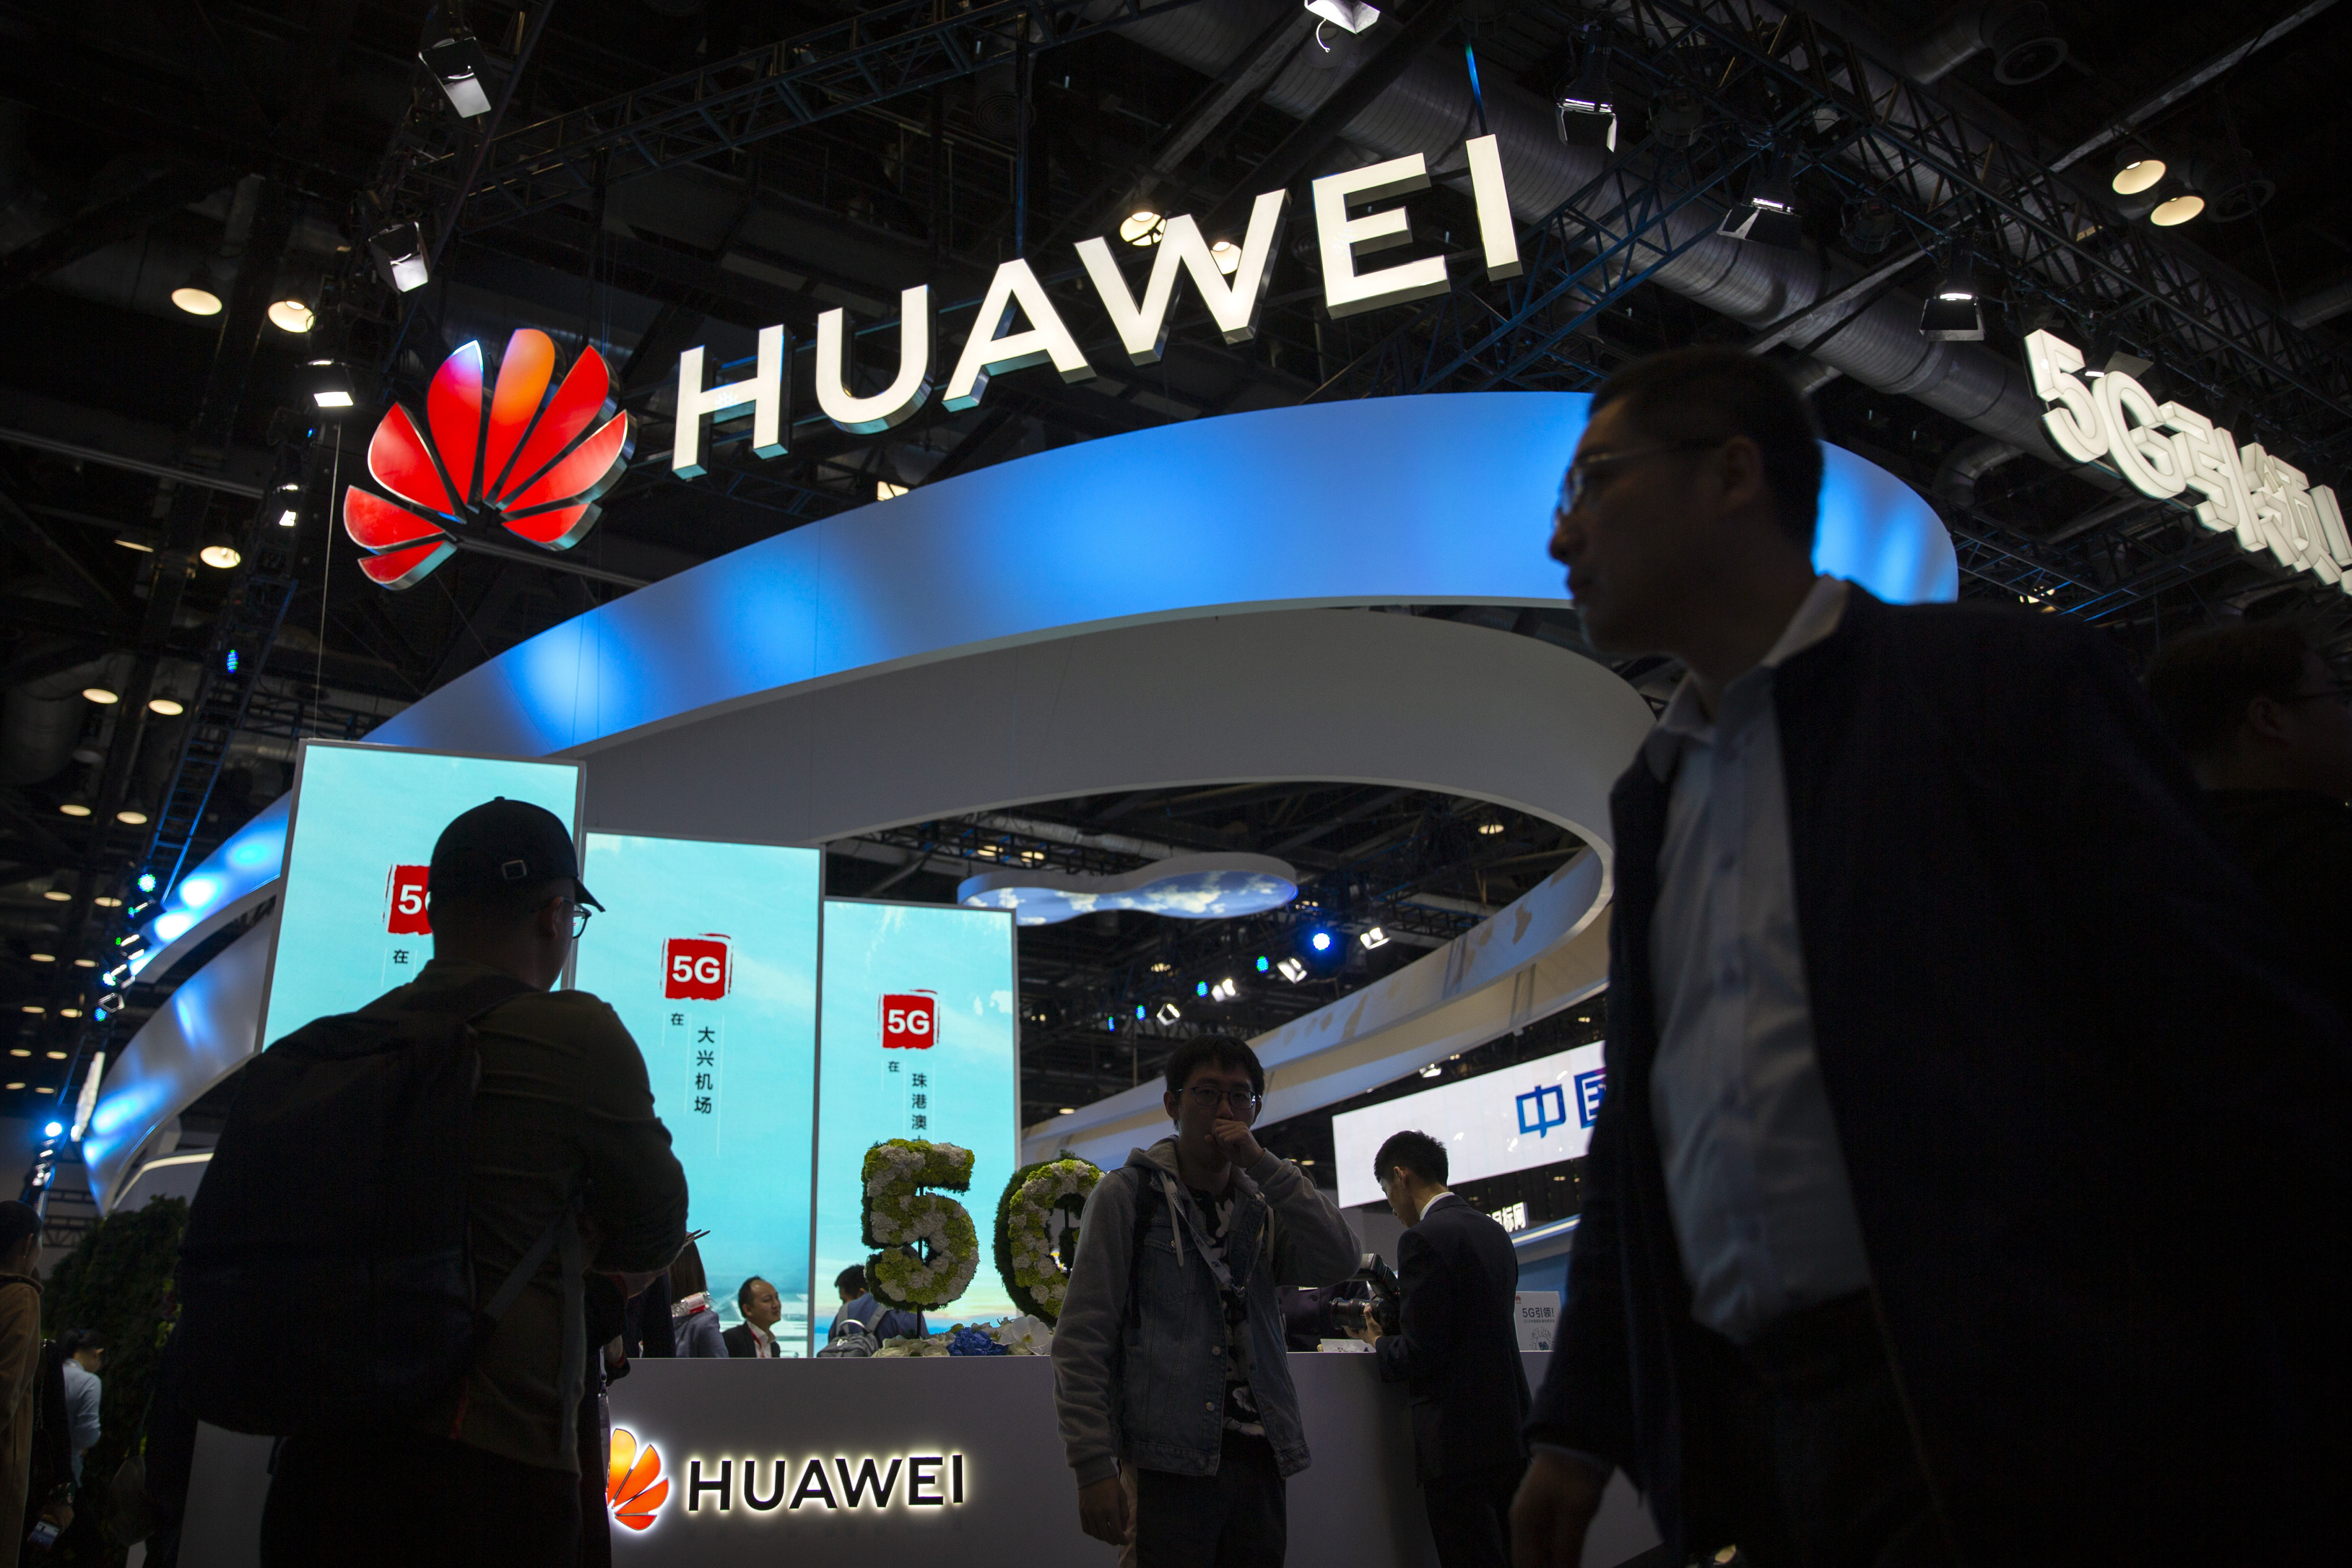 A display for 5G services from Huawei seen at the PT Expo in Beijing, October 31, 2019. Photo: AP